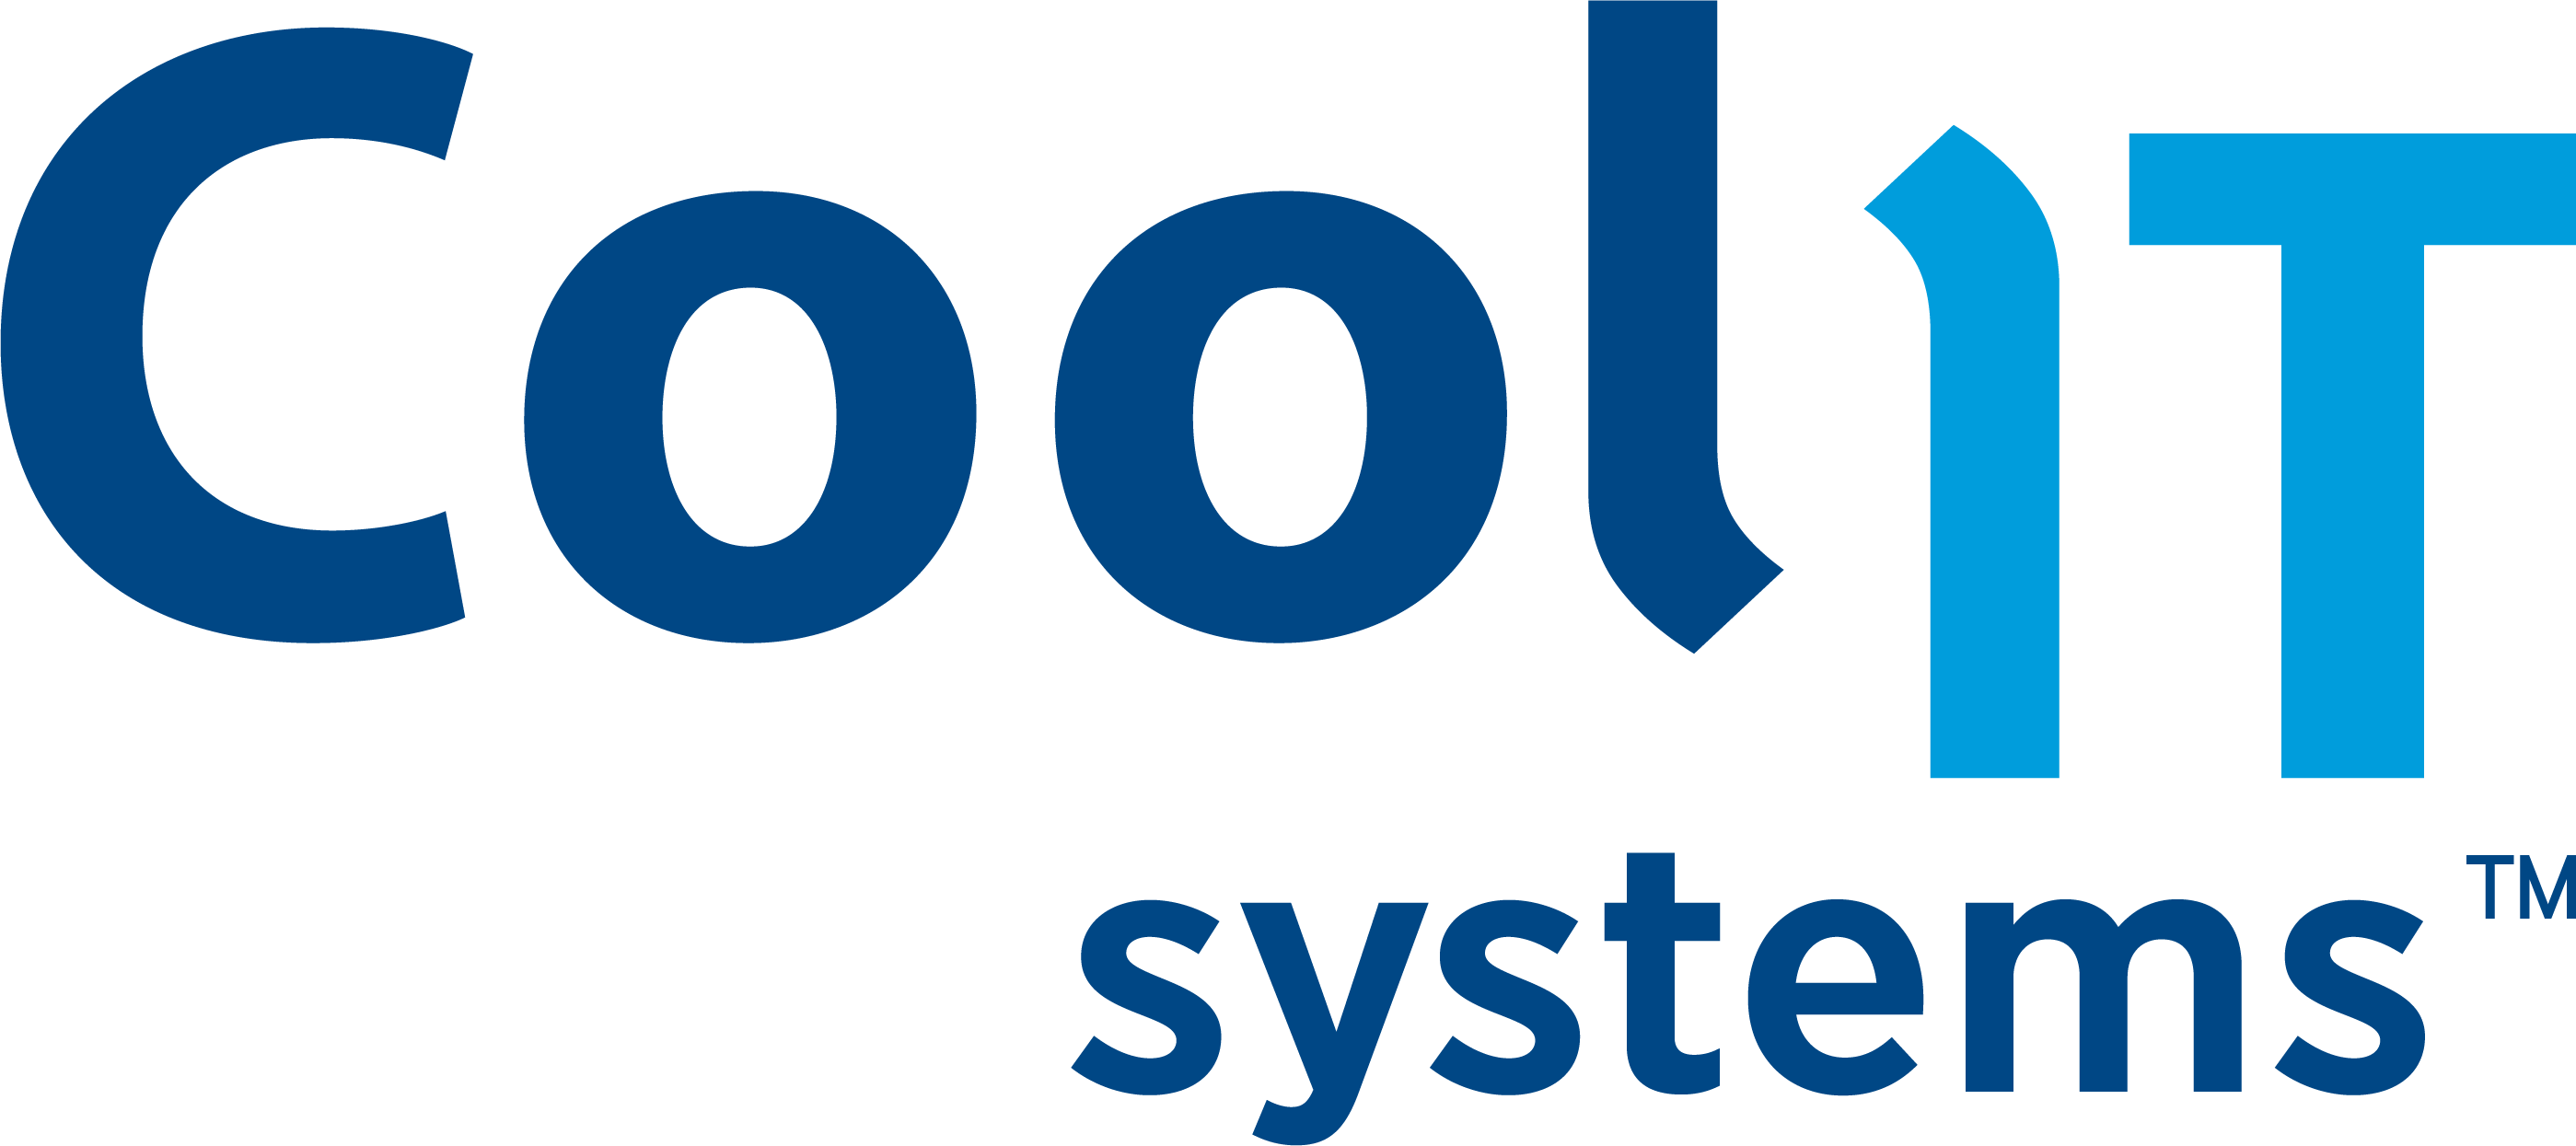 CoolIt Systems Inc.